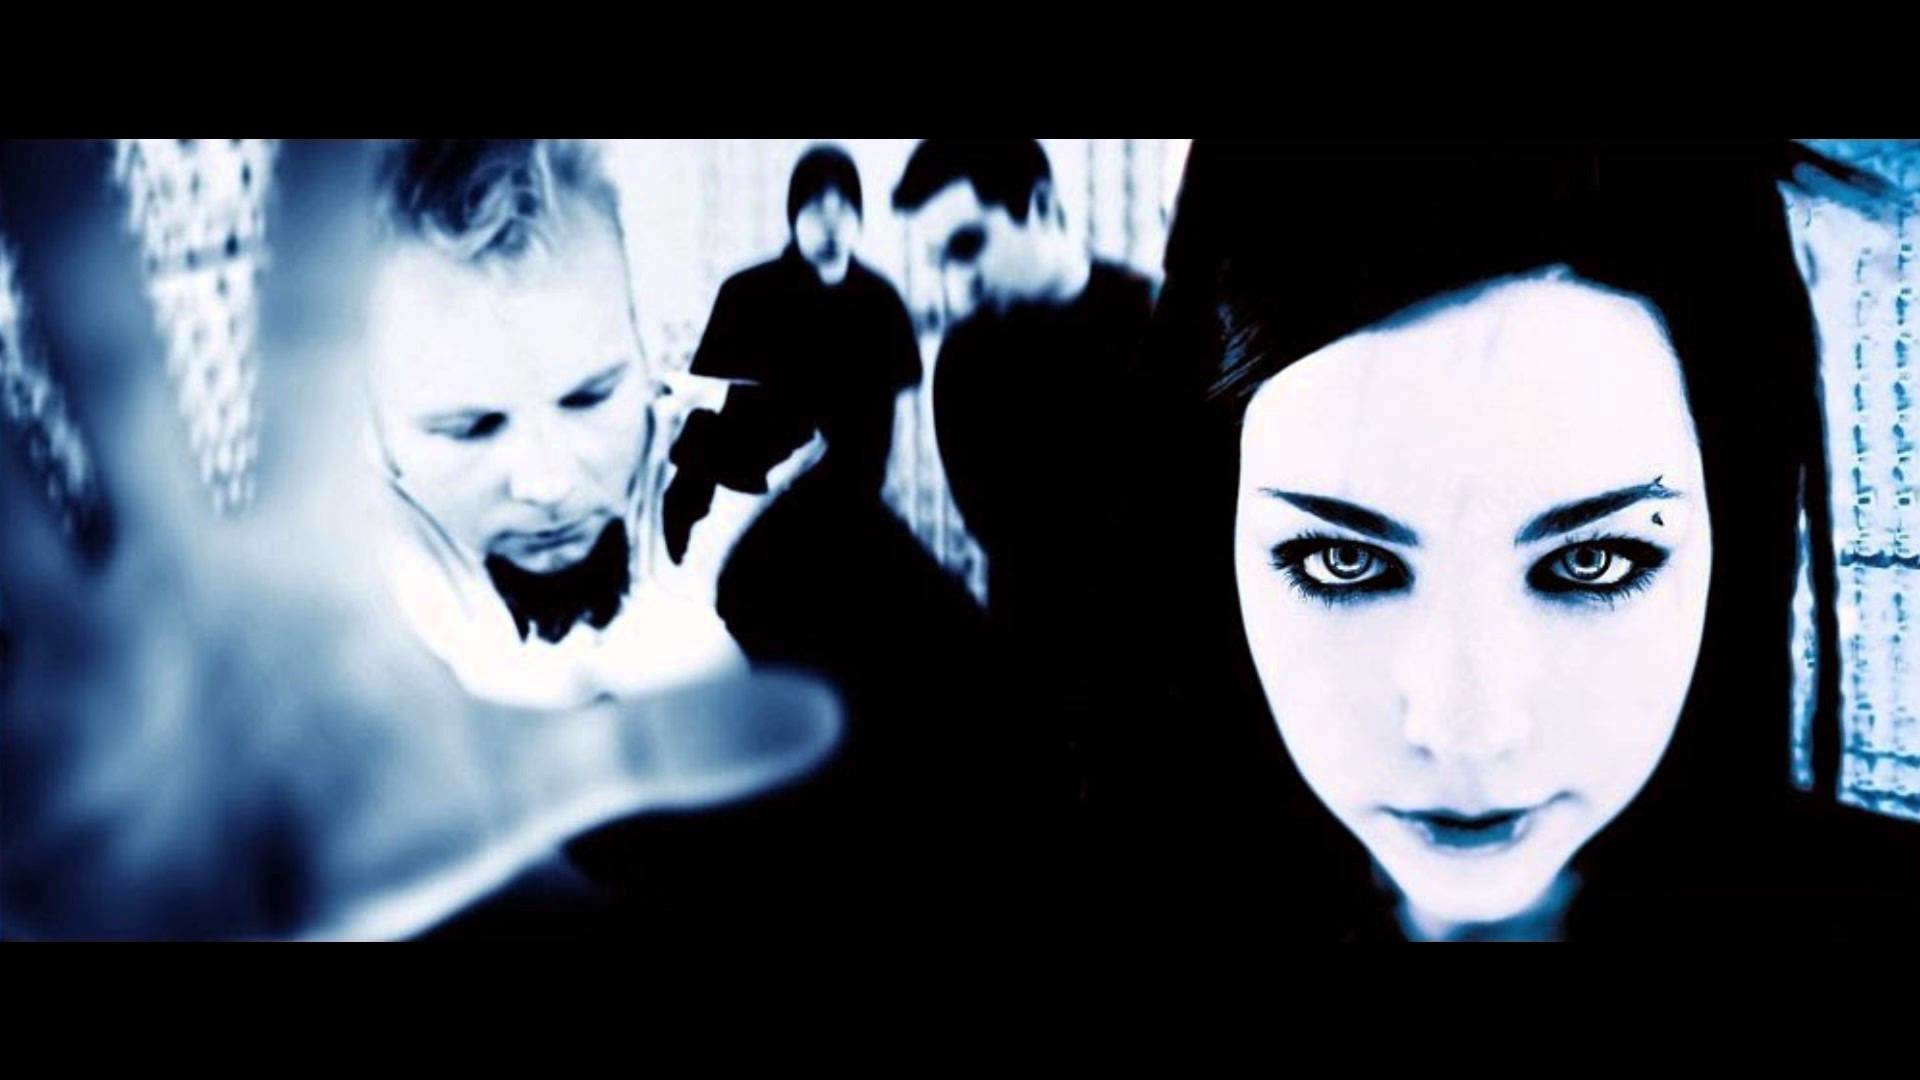 1920x1080 ... 103 best evanescence images on Pinterest | Amy lee evanescence ... Evanescence  Wallpapers ...